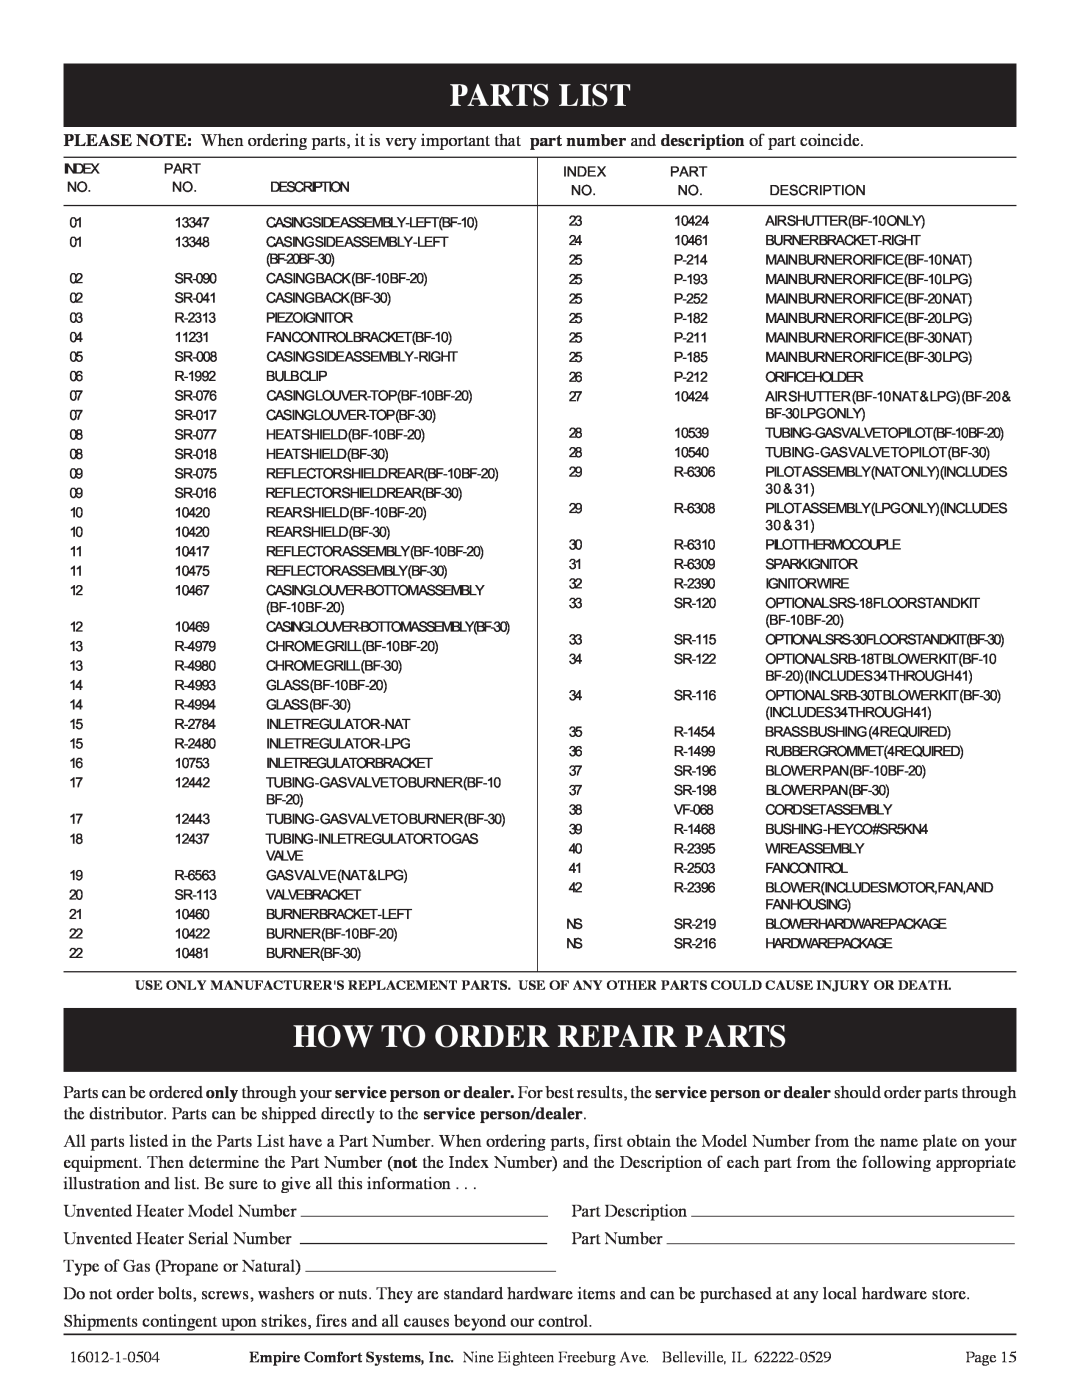 Empire Products BF-20-2, BF-30-2 Parts List, How To Order Repair Parts, part number and description of part coincide 